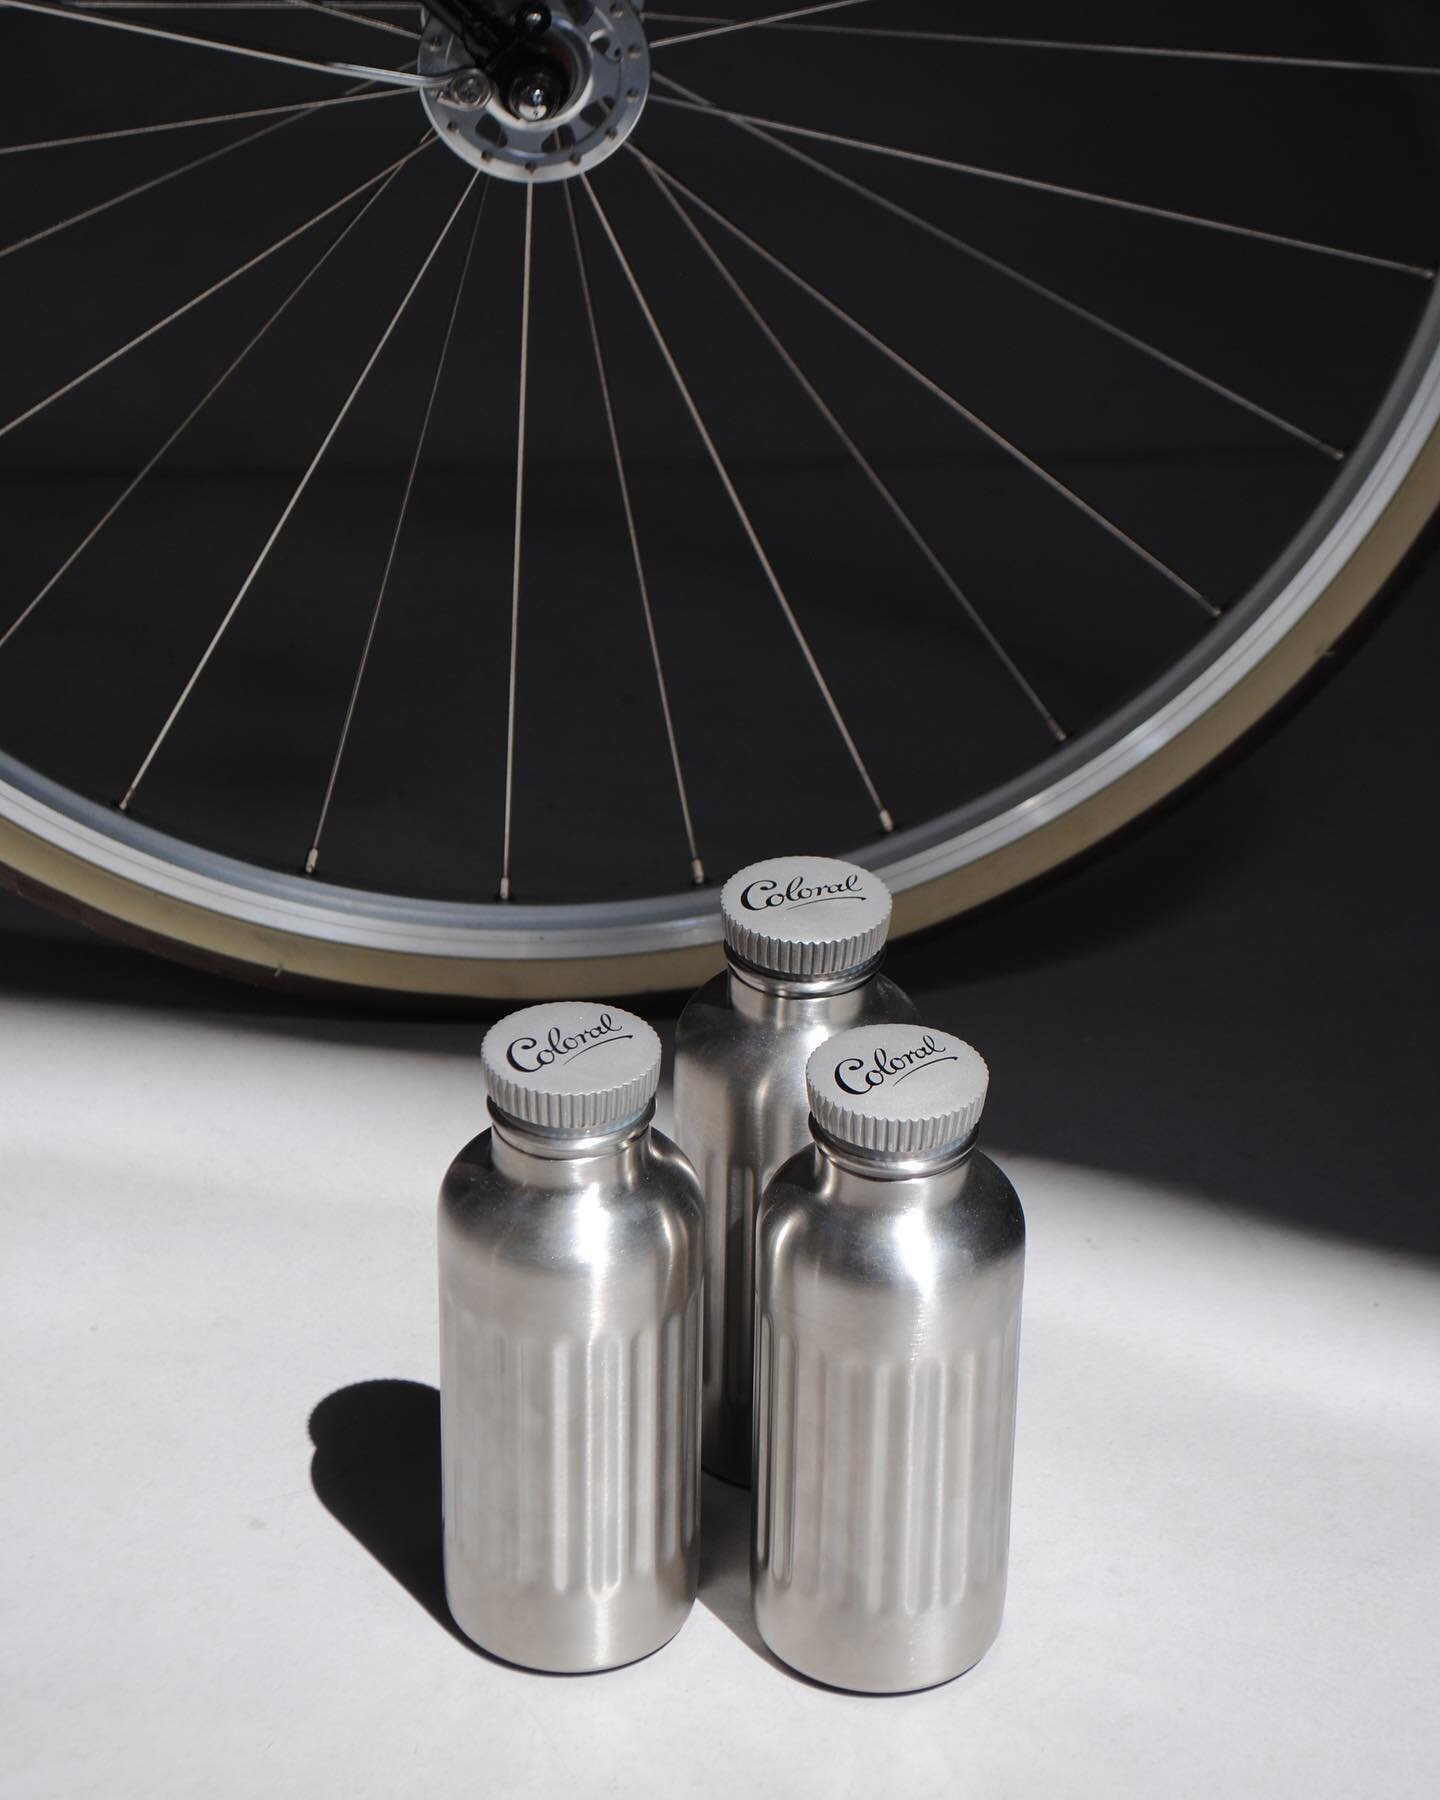 The sleekest design-led bicycle accessories from @coloral1947 &amp; @tigrbikelock

#freddiegrubb #madeinlondon #commutebybike #commuterbike #cycletoworkscheme #lookmumnohands #modernclassic #designlovers #londondesign #londoncraft #islingtondesign #s